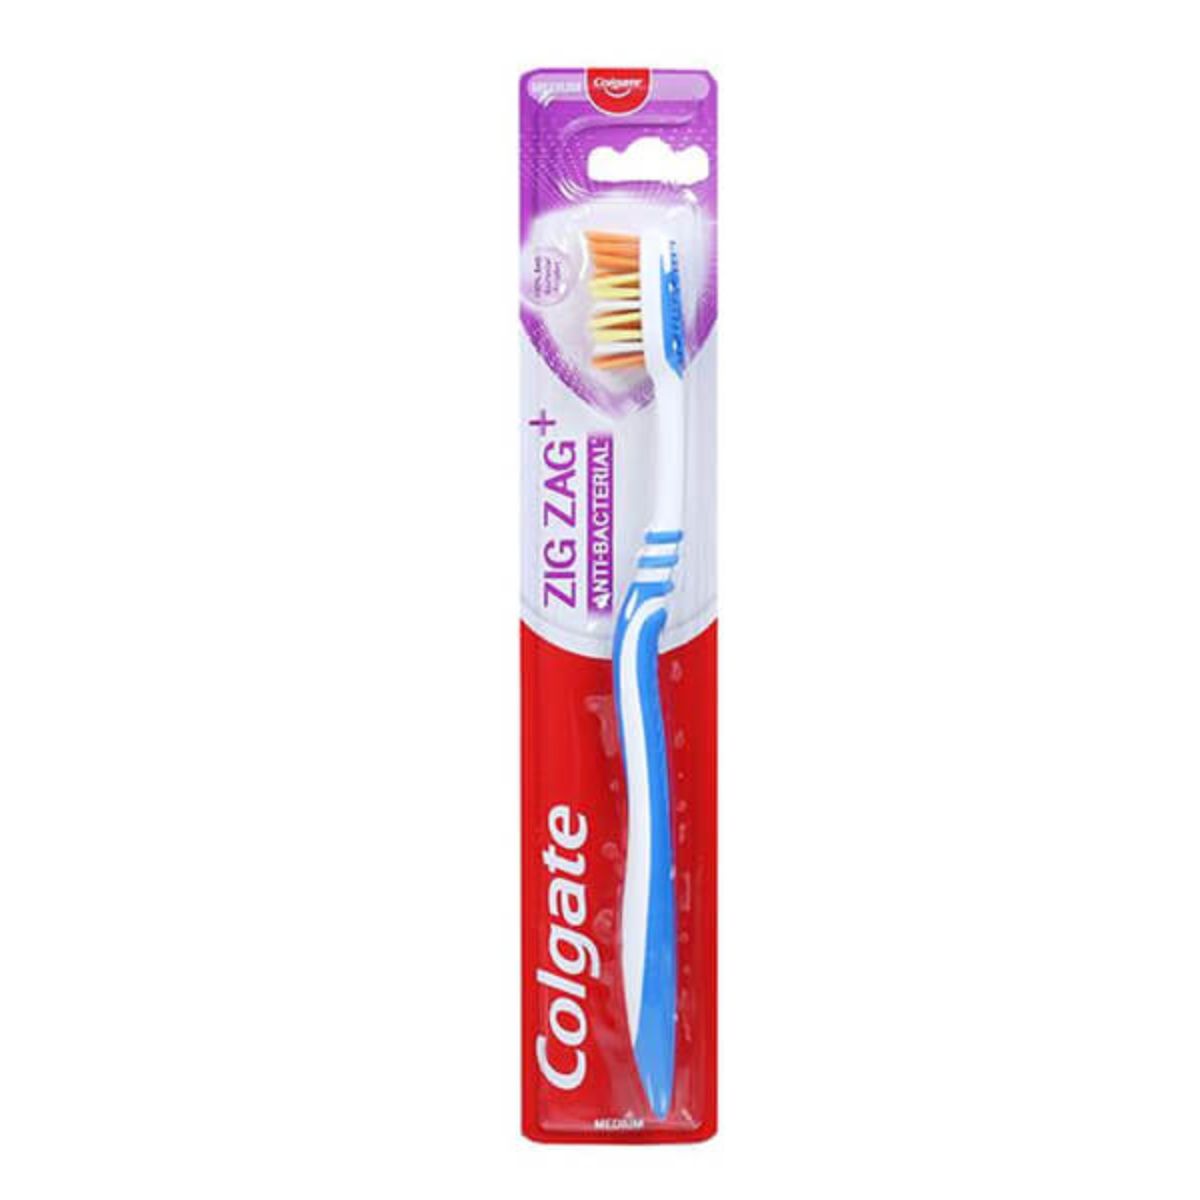 A blue and purple Colgate - Zig Zag Anti Bacterial toothbrush in a package.